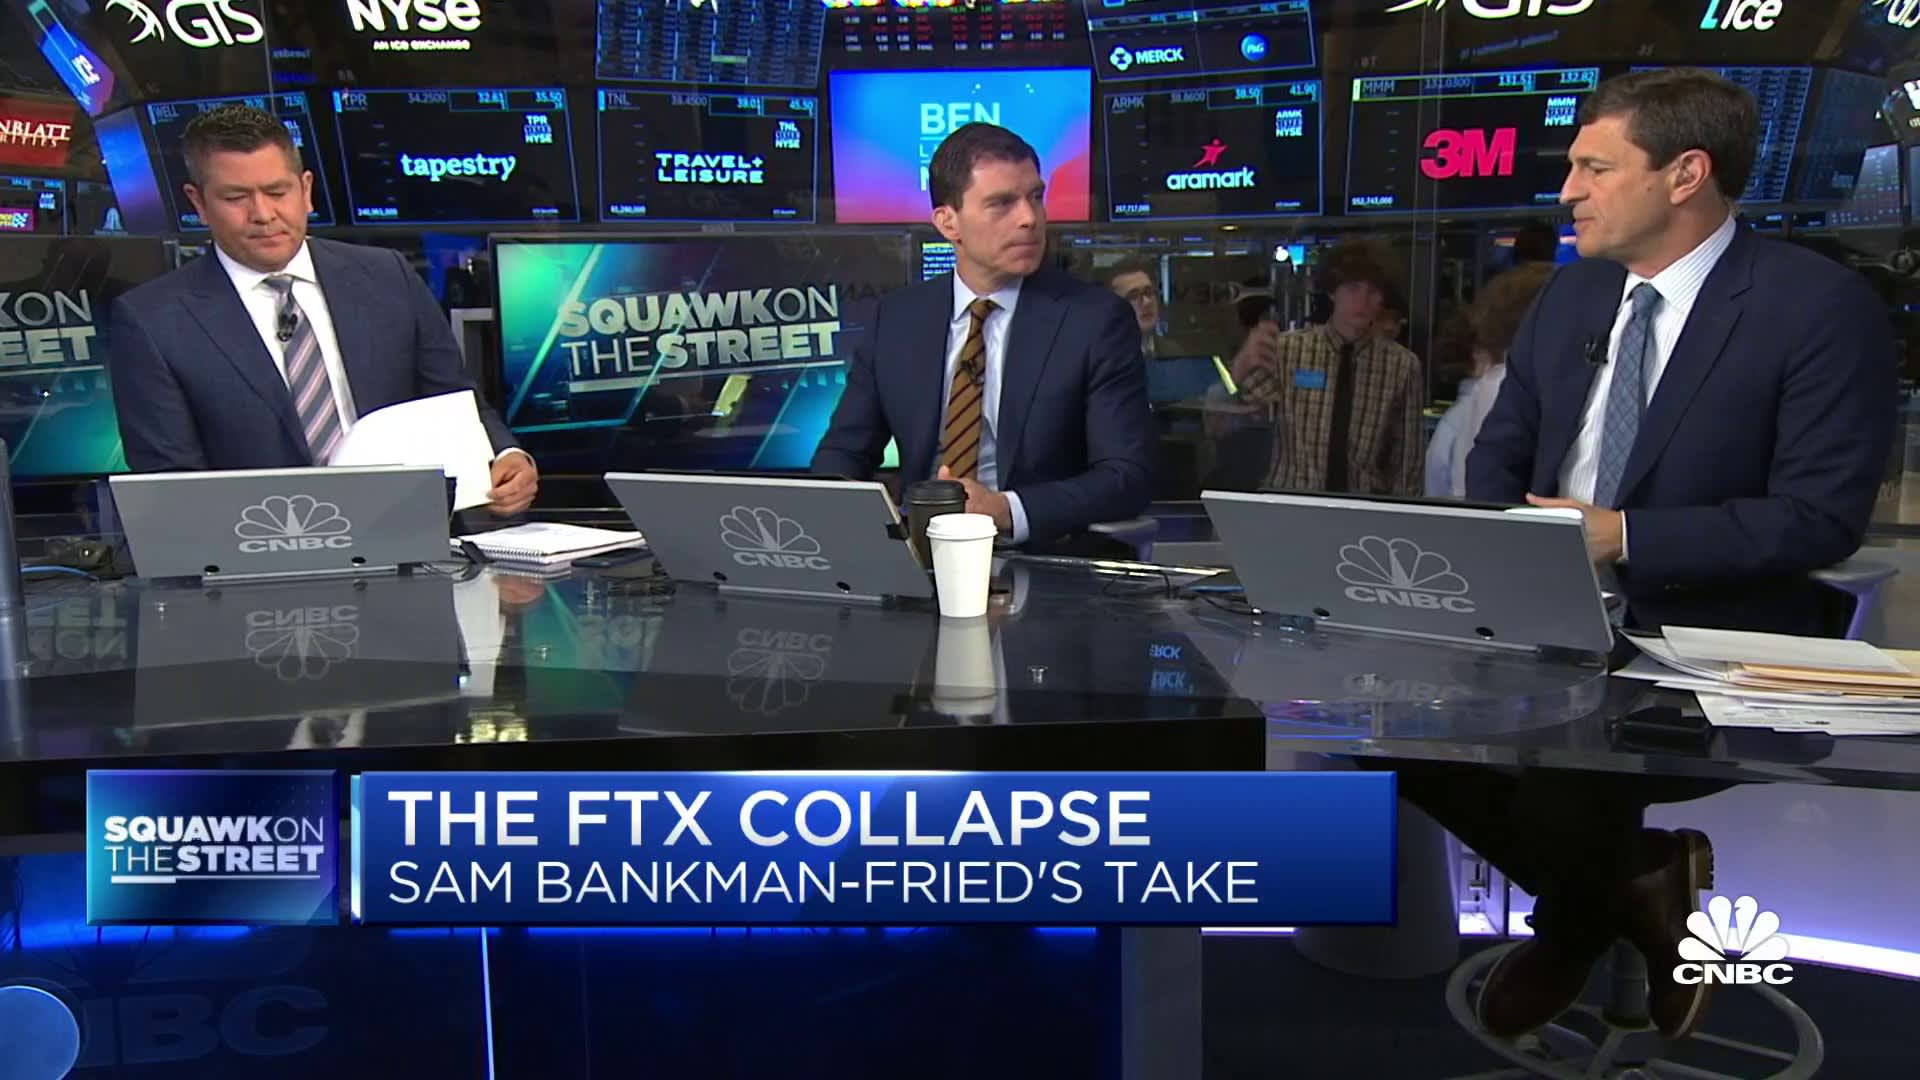 FTX's Sam Bankman Fried to NYT: I would have been more thorough if I had concentrated better